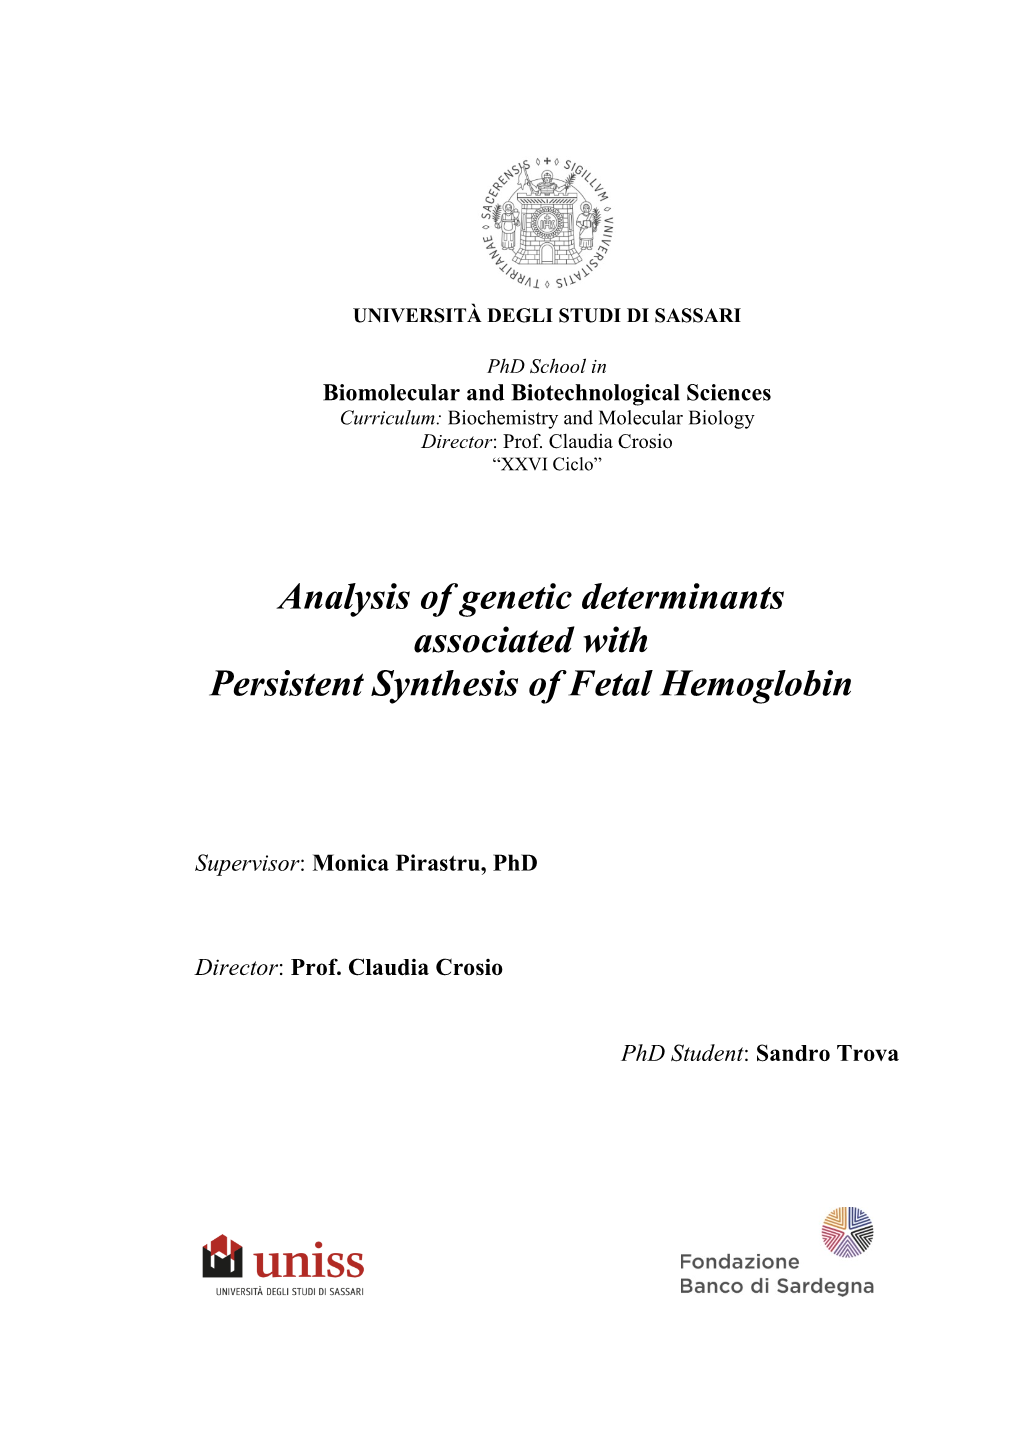 Analysis of Genetic Determinants Associated with Persistent Synthesis of Fetal Hemoglobin